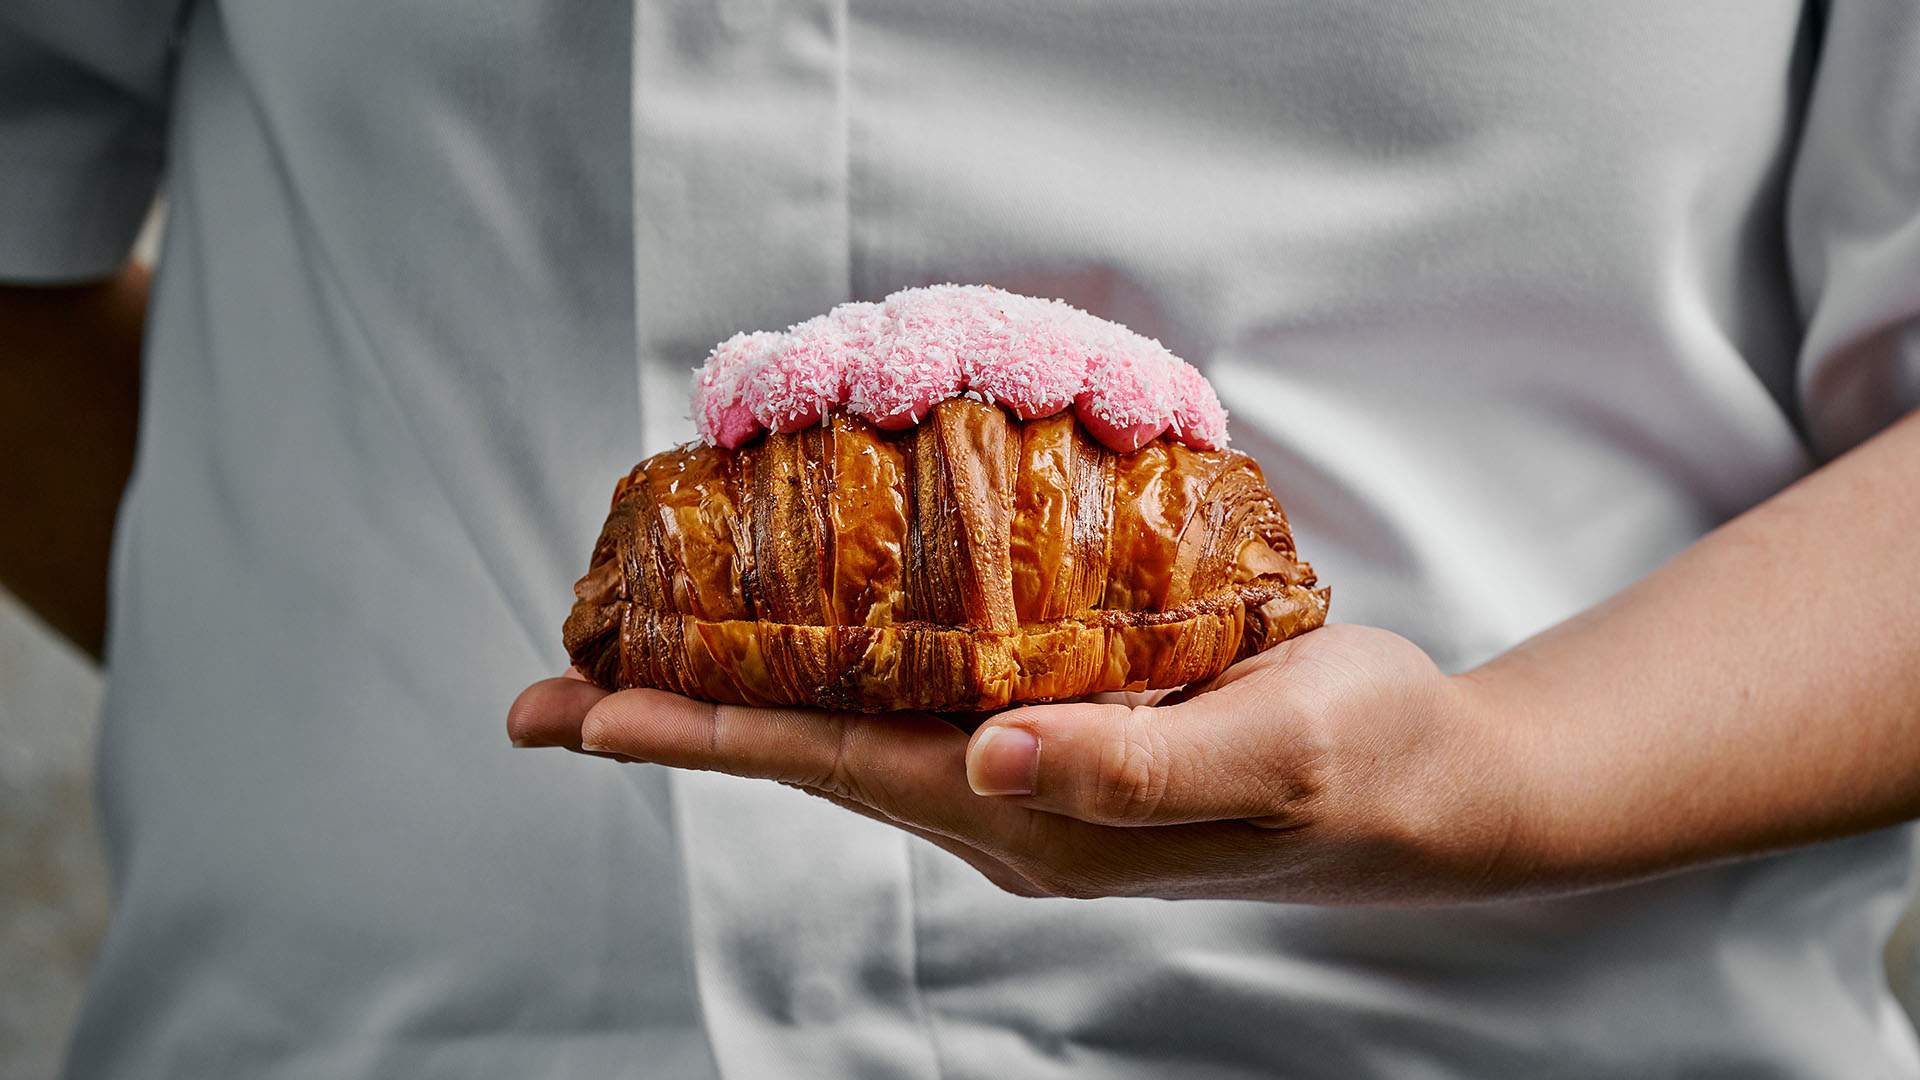 Melbourne's World-Famous Lune Croissanterie Is Opening Not One But Two Sydney Stores